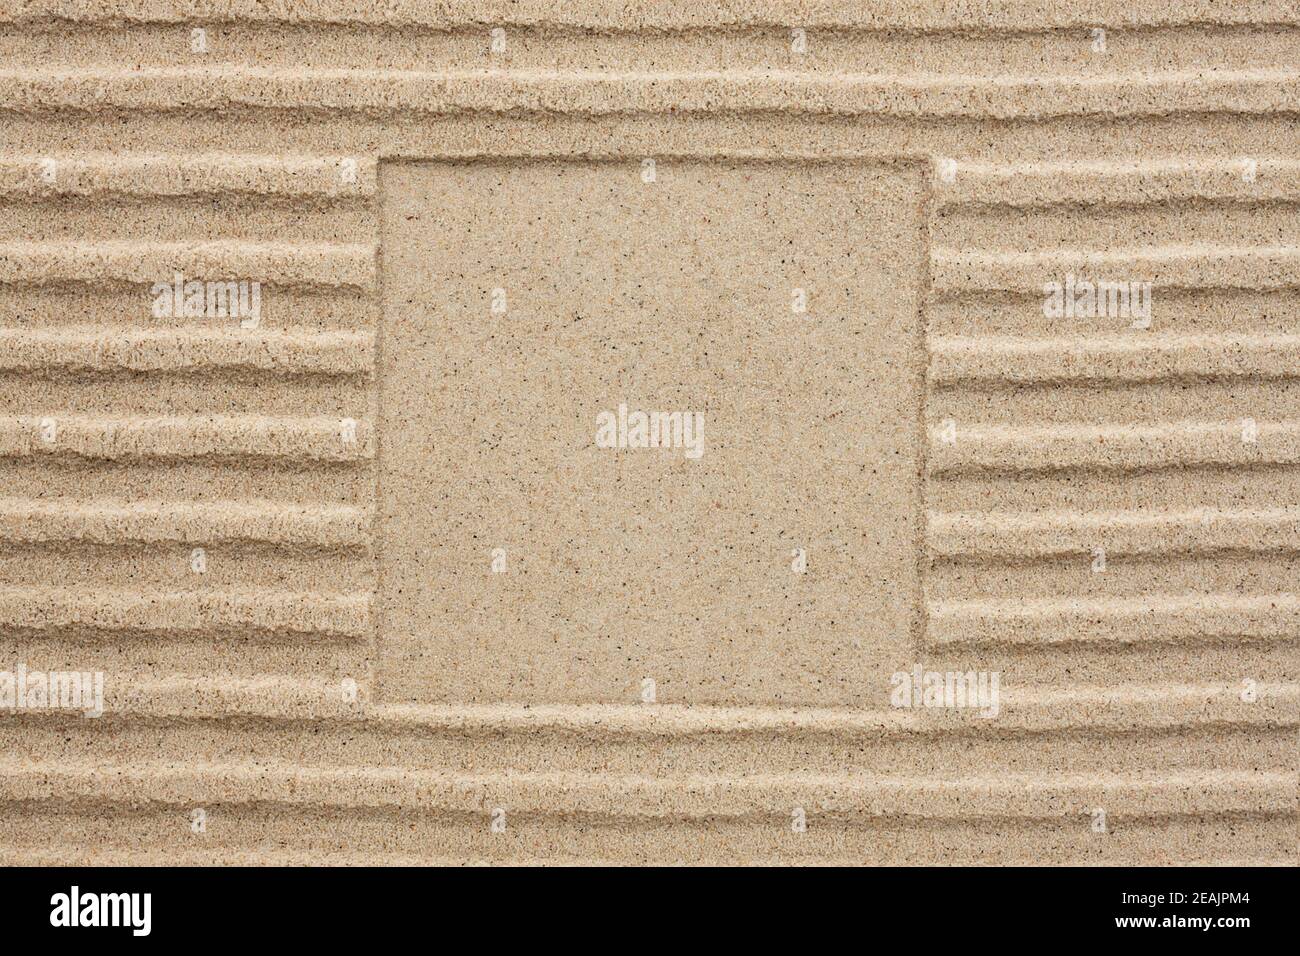 Embossed square in the sand Stock Photo